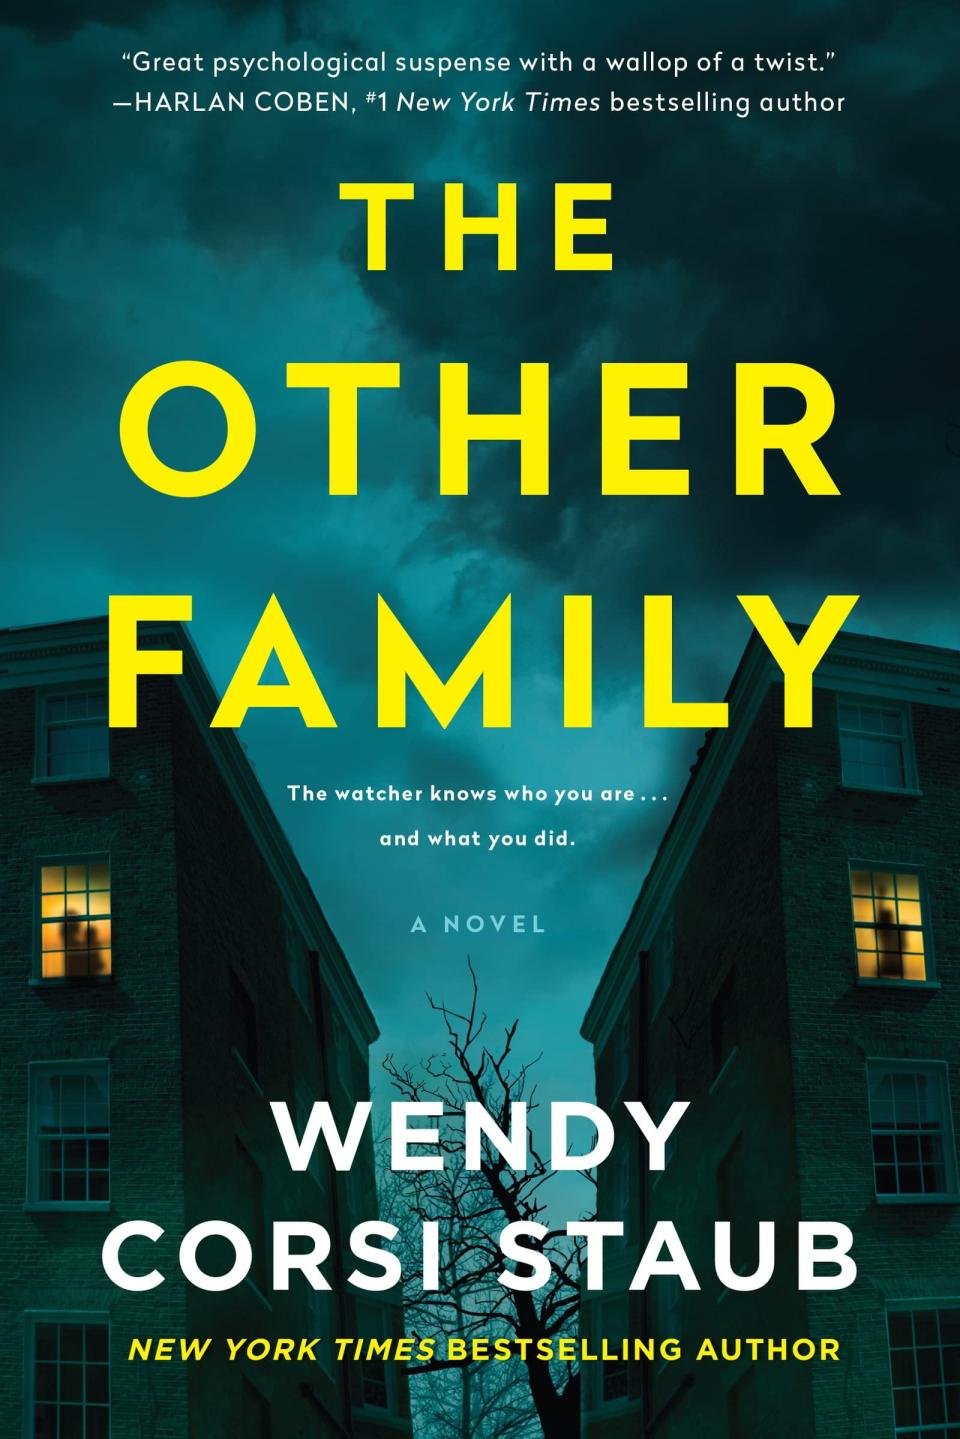 <p>Expect to sleep with the lights on after reading <span>"The Other Family"</span> by Wendy Corsi Staub. The Howell family are California transplants who find the perfect brownstone to move into in Brooklyn. There's plenty of room for the couple, their daughters, and even their pug. There's just one catch: the previous residents of their dream home died in an unsolved triple homicide. Soon, the Howells begin to feel as if someone is watching their family, and the eldest daughter Stacey just can't stop digging into the case. However, she may discover her own family has a shocking connection to the previous owners that will upend the Howell family's seemingly perfect lives forever. </p> <p><em>Release date: Jan. 18</em></p>